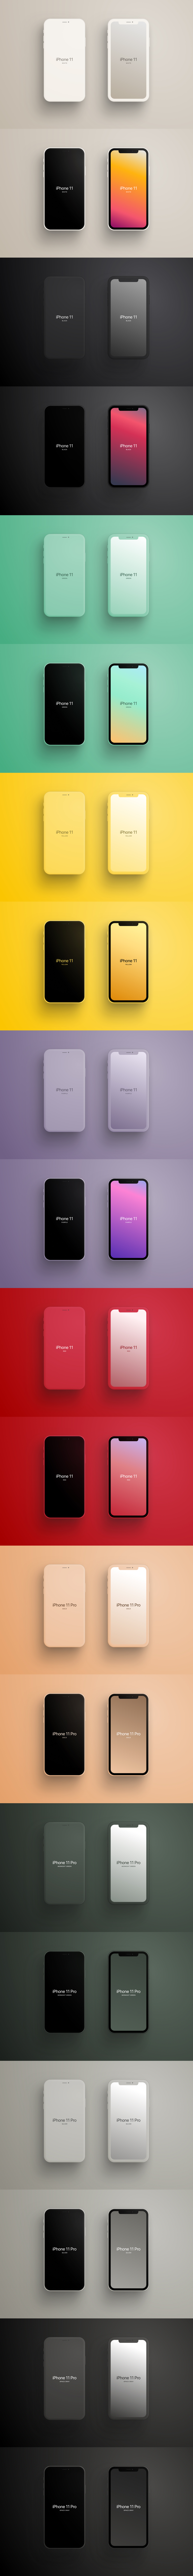 Matte iPhone Free Mockups for Figma - Created in Figma, for Figma users. These mockups were made from scratch in Figma to support components and variants. Just choose the iPhone model, then pick a color from a list of official color presets in the variants menu.